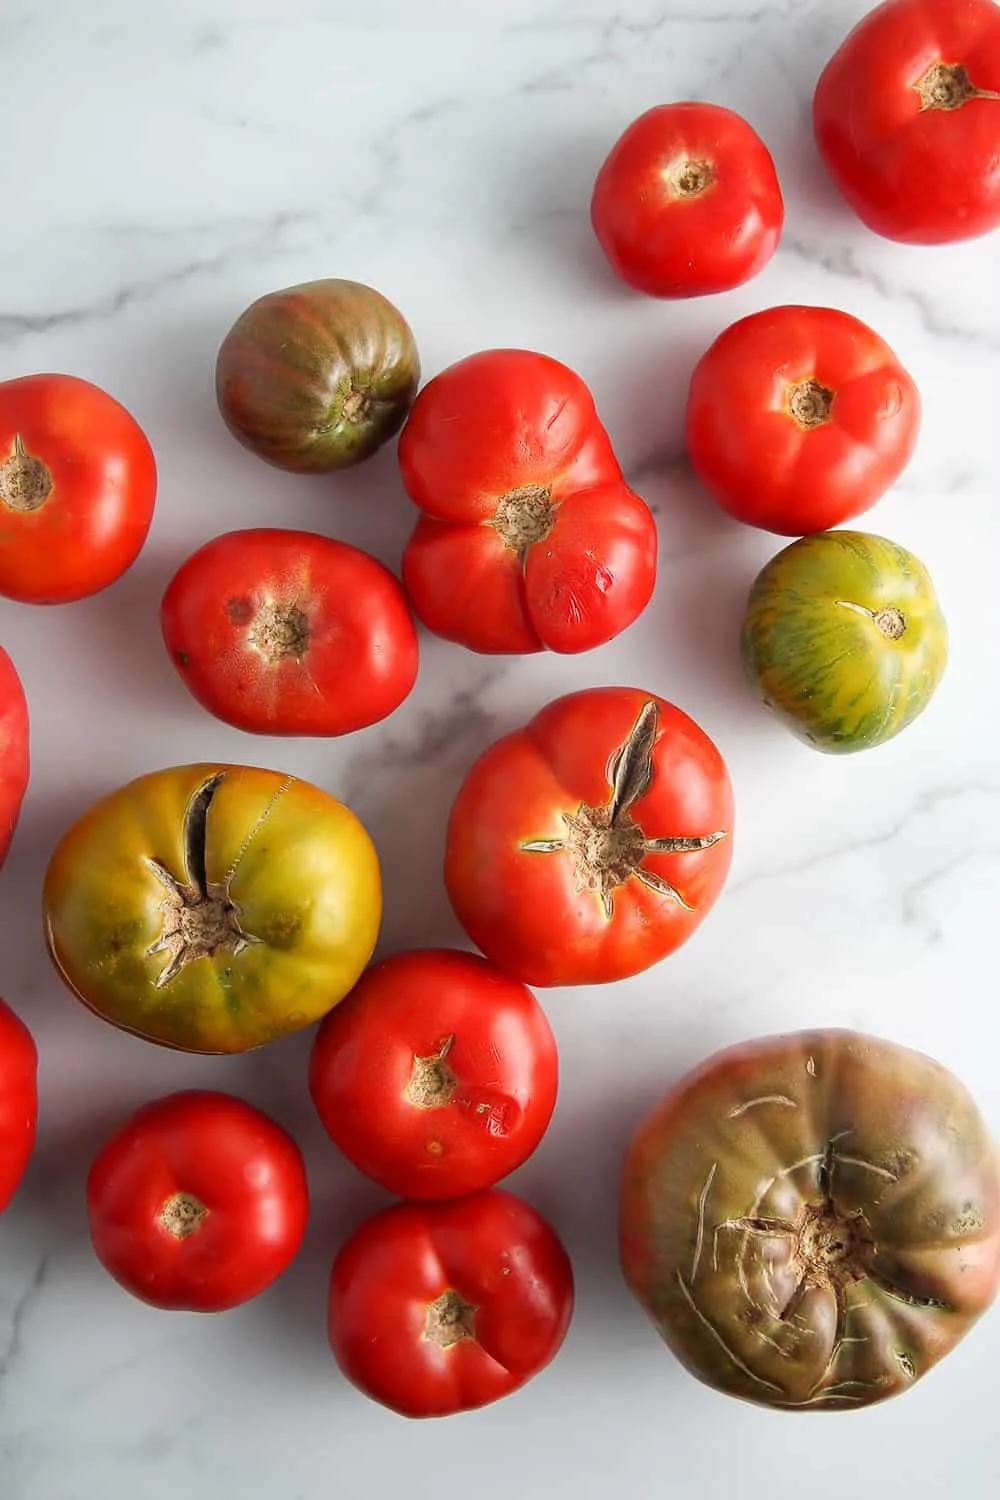 Assorted fresh heirloom tomatoes on a marble surface